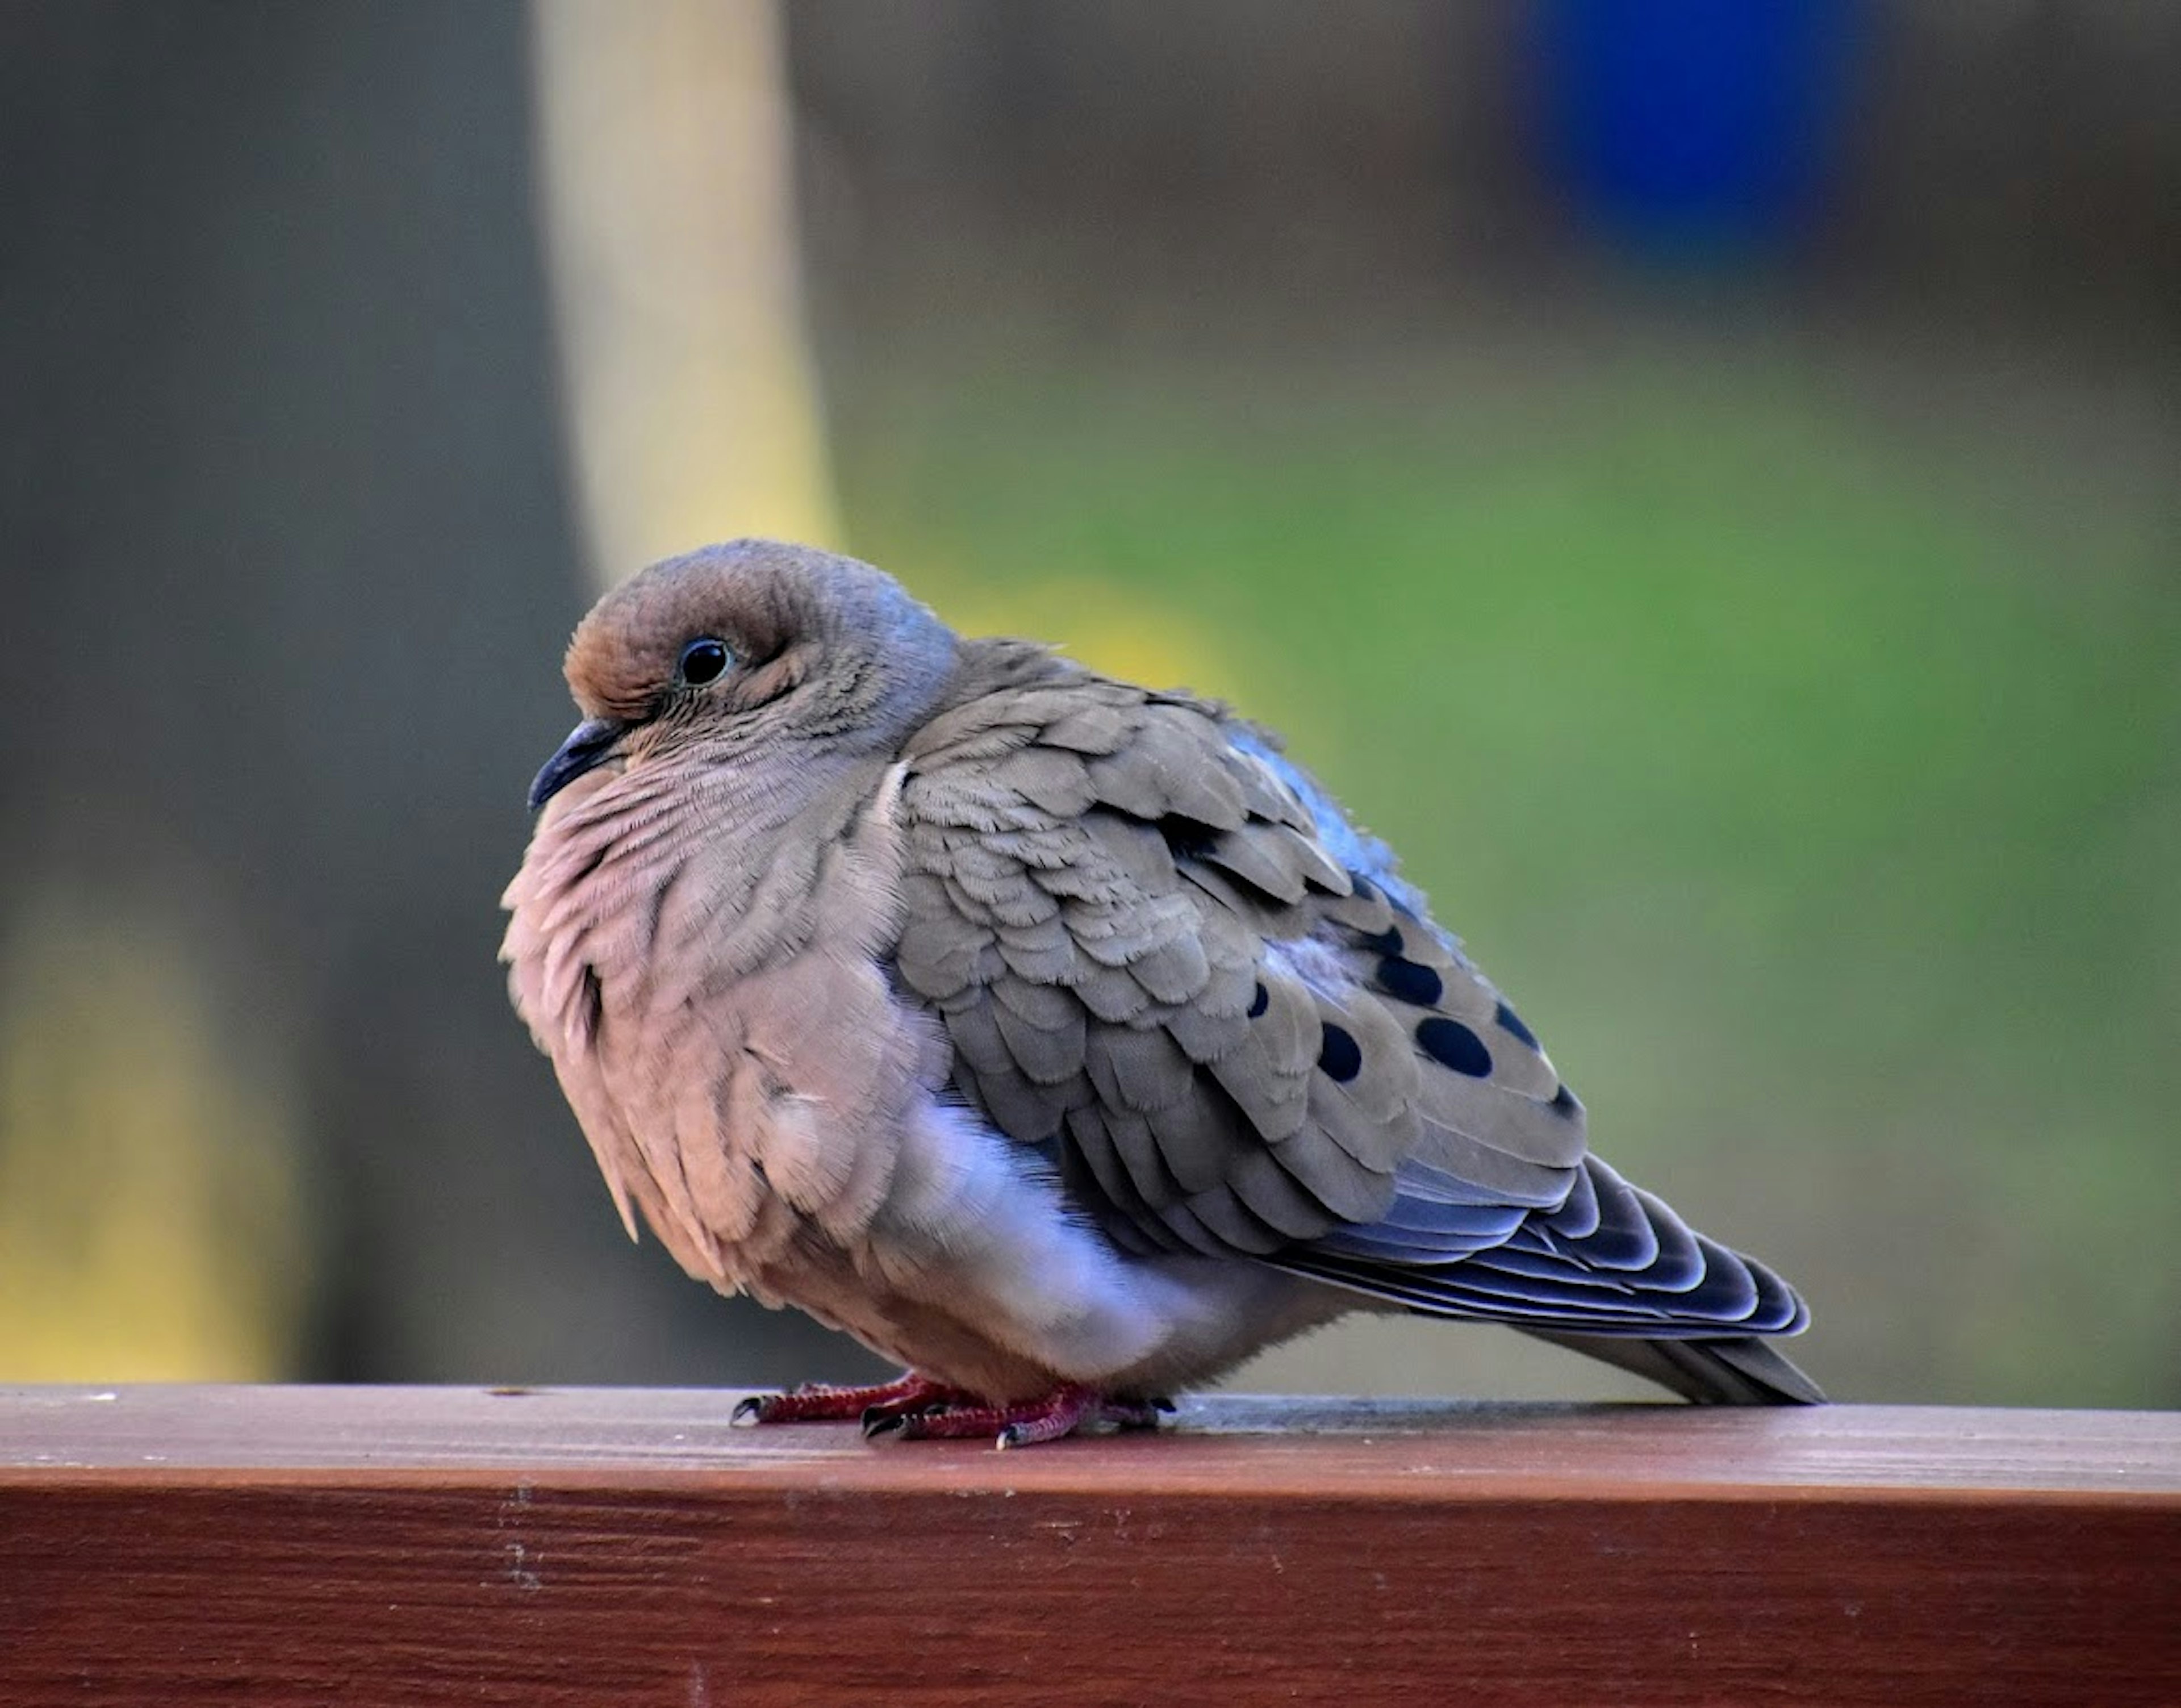 This is either a Mourning Dove or a softball with feathers and a tail. IDK.